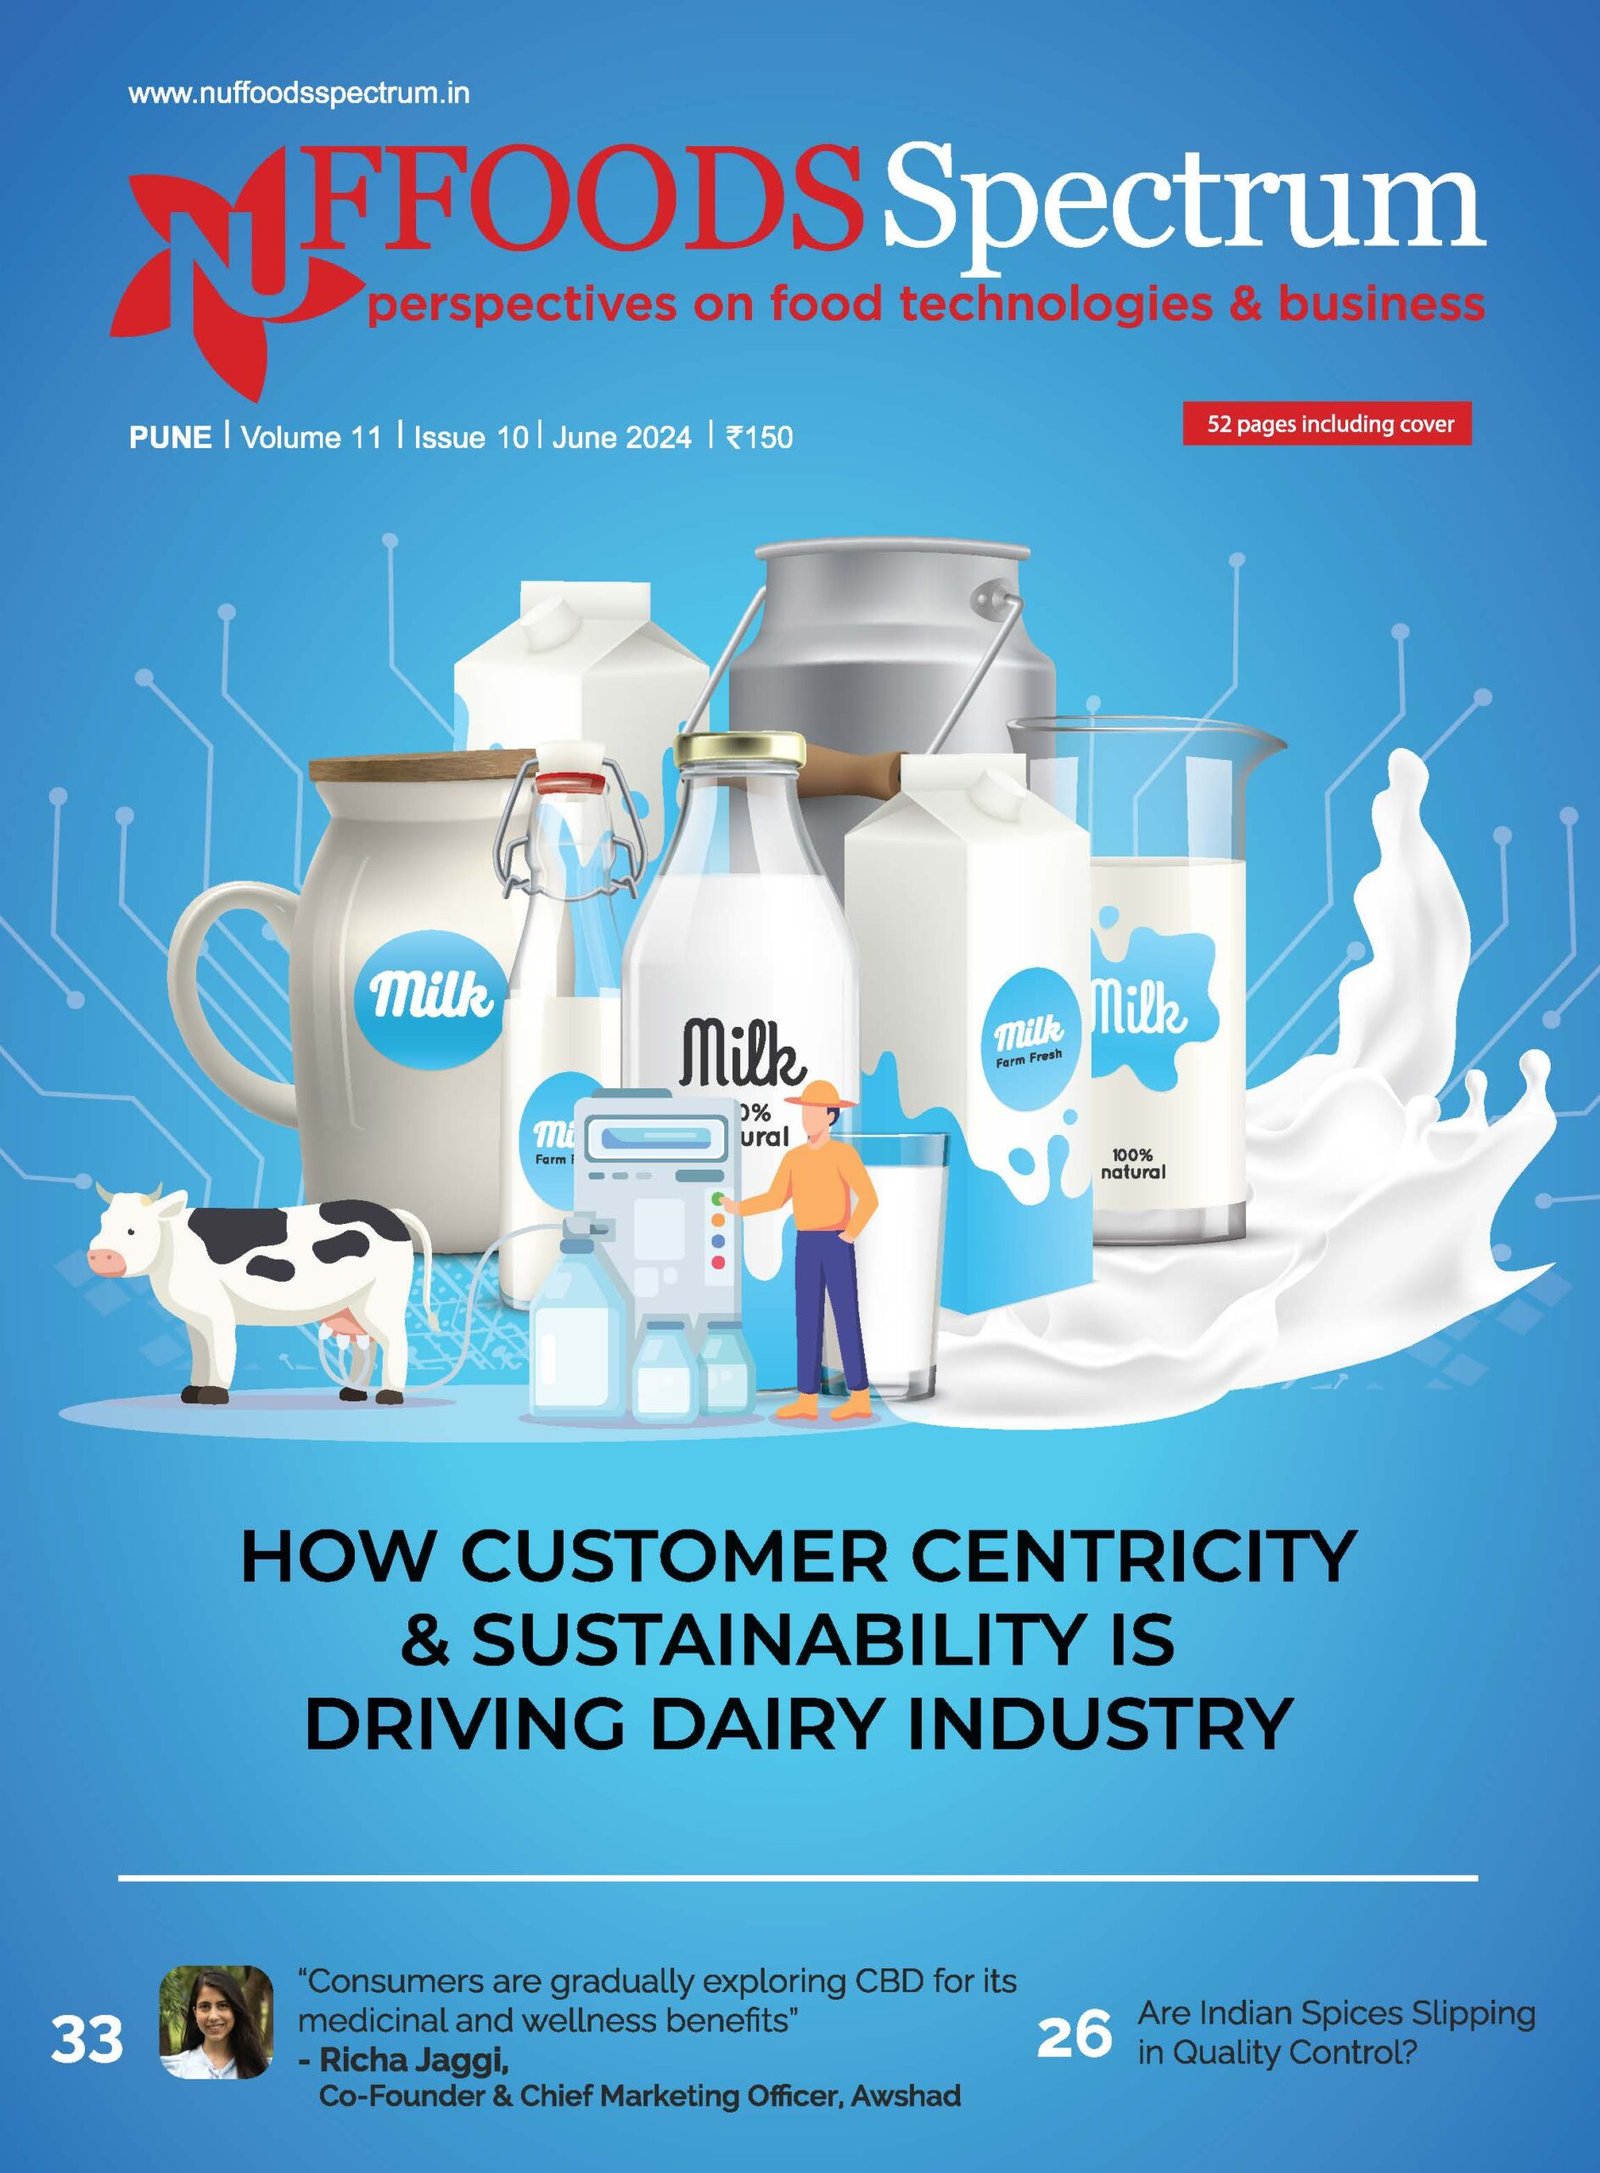 HOW Customer Centricity & Sustainability is Driving Dairy Industry